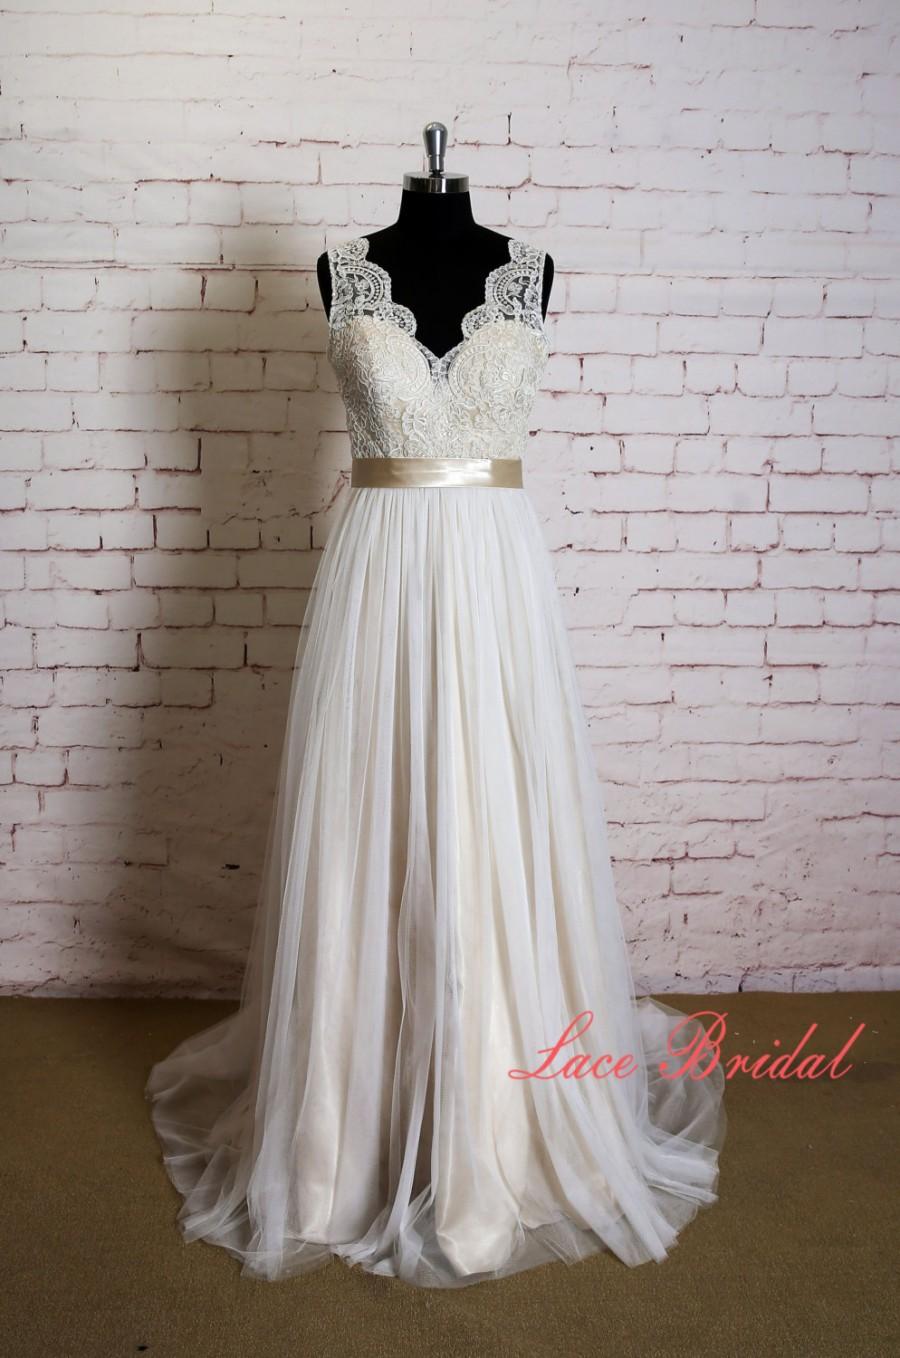 Wedding - Elegant Lace Wedding Dress with V Neck Simple Wedding Dress with Champagne Underlay Classic Ivory Overlay Bridal Gown with Sheer Tulle Train